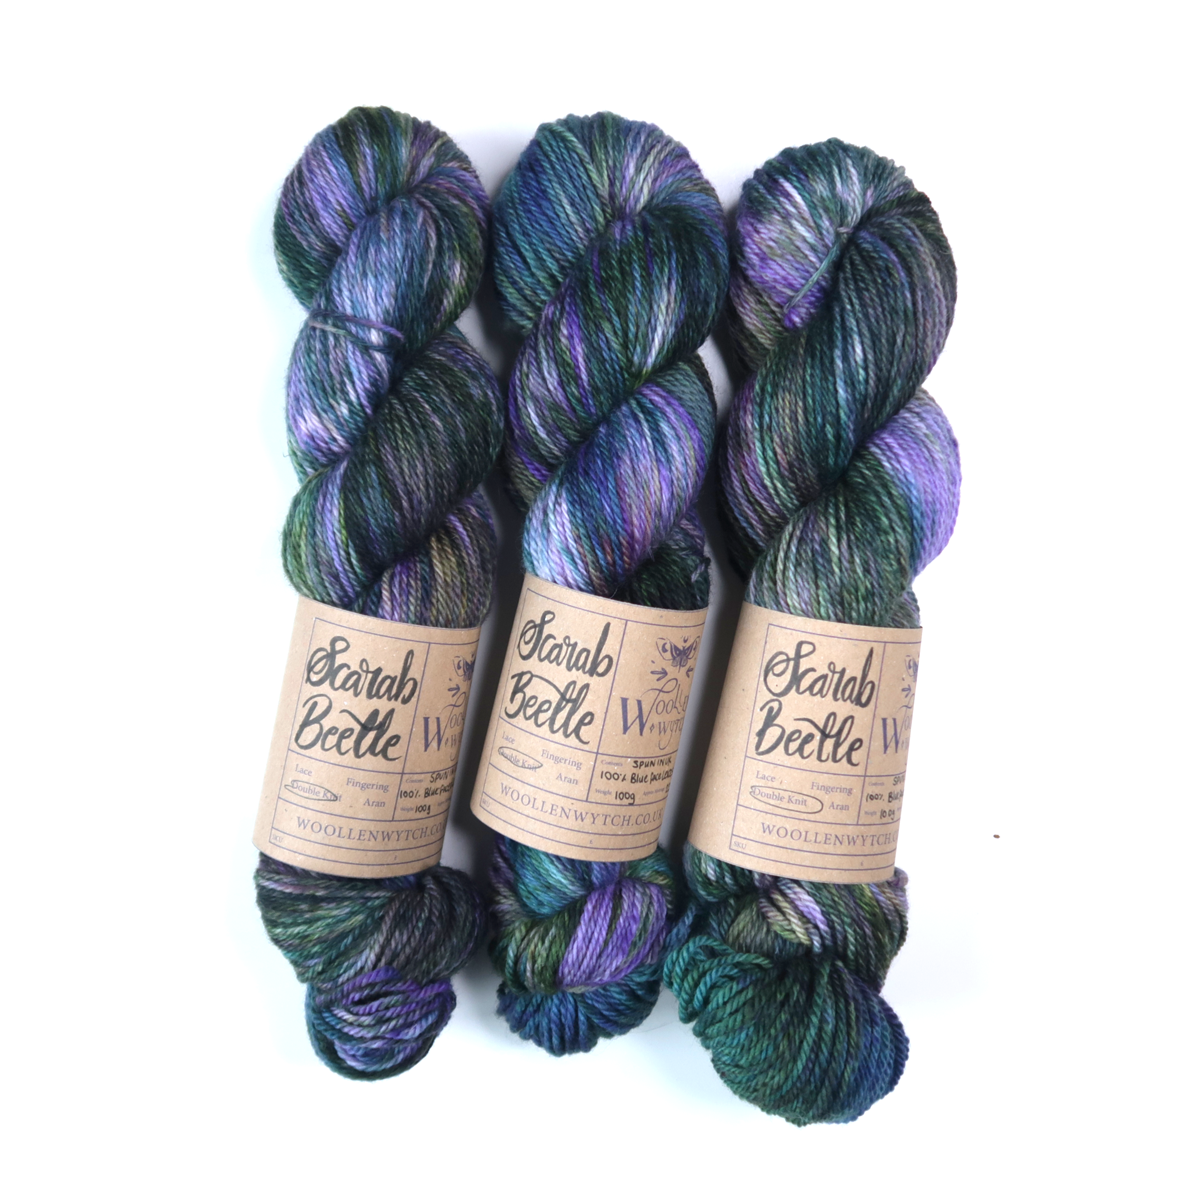 Purple and green scarab bettle hand dyed bfl yarn doulbe knit by woollen wytch